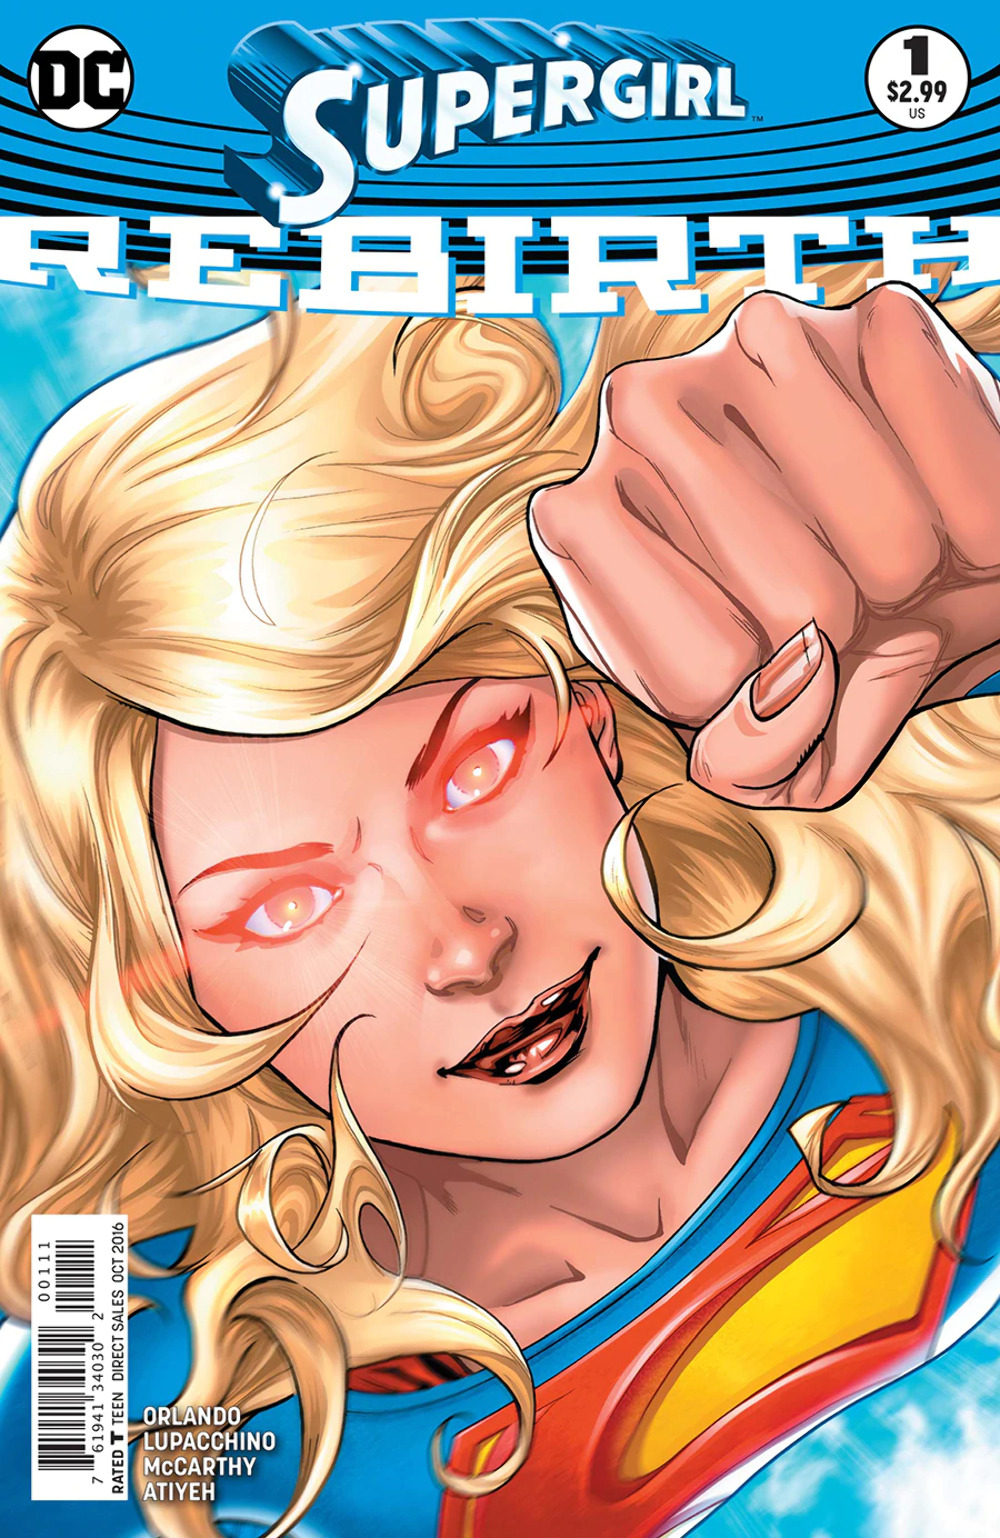 SUPERGIRL REBIRTH #1 DC Comics 2016 50 cents combined shipping